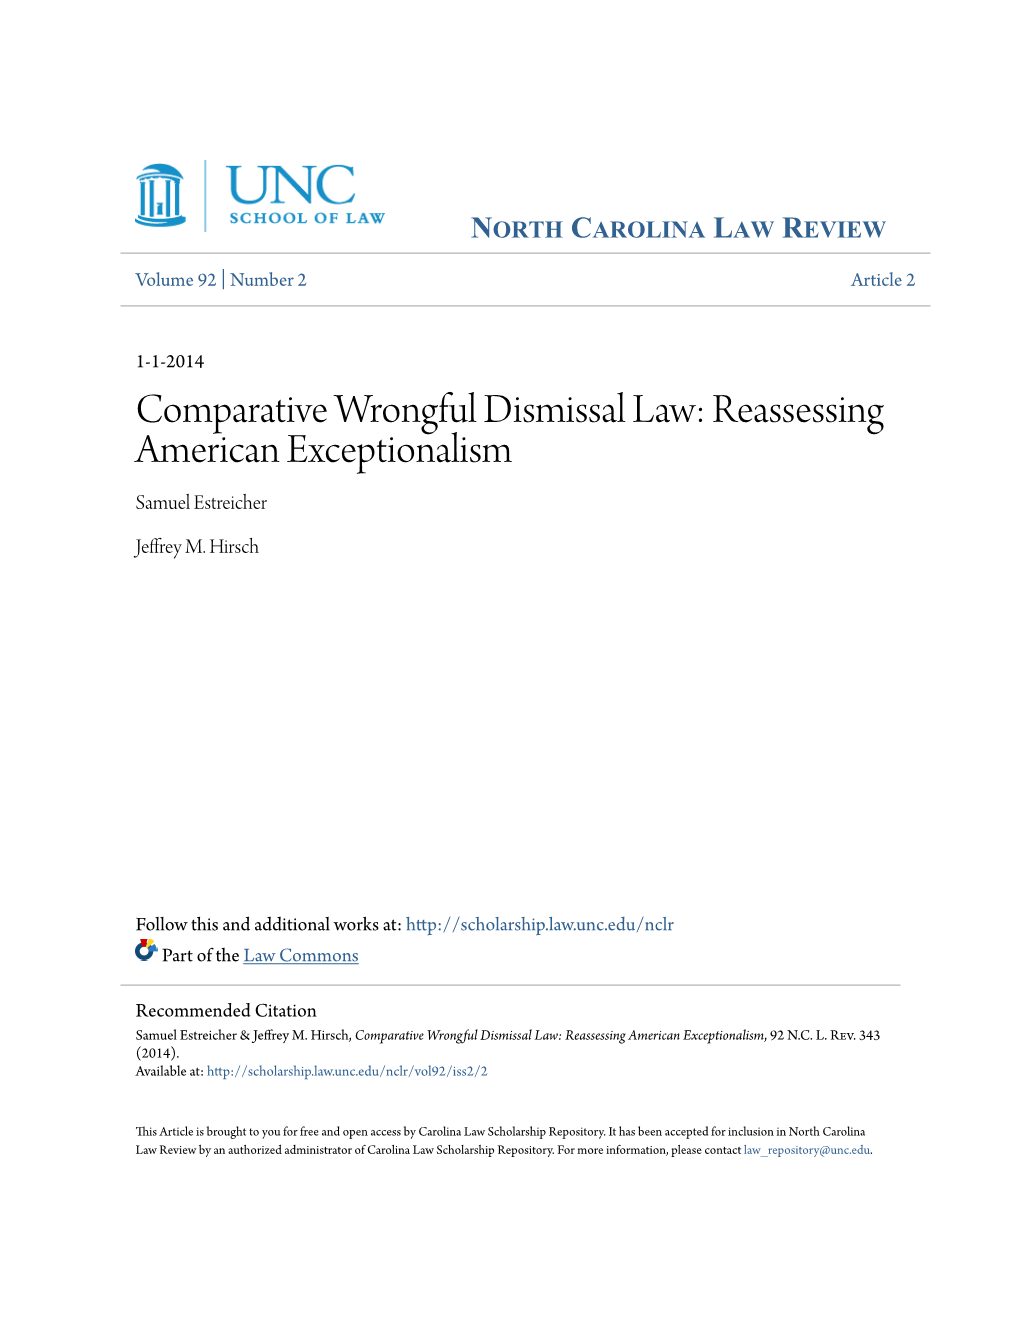 Comparative Wrongful Dismissal Law: Reassessing American Exceptionalism Samuel Estreicher